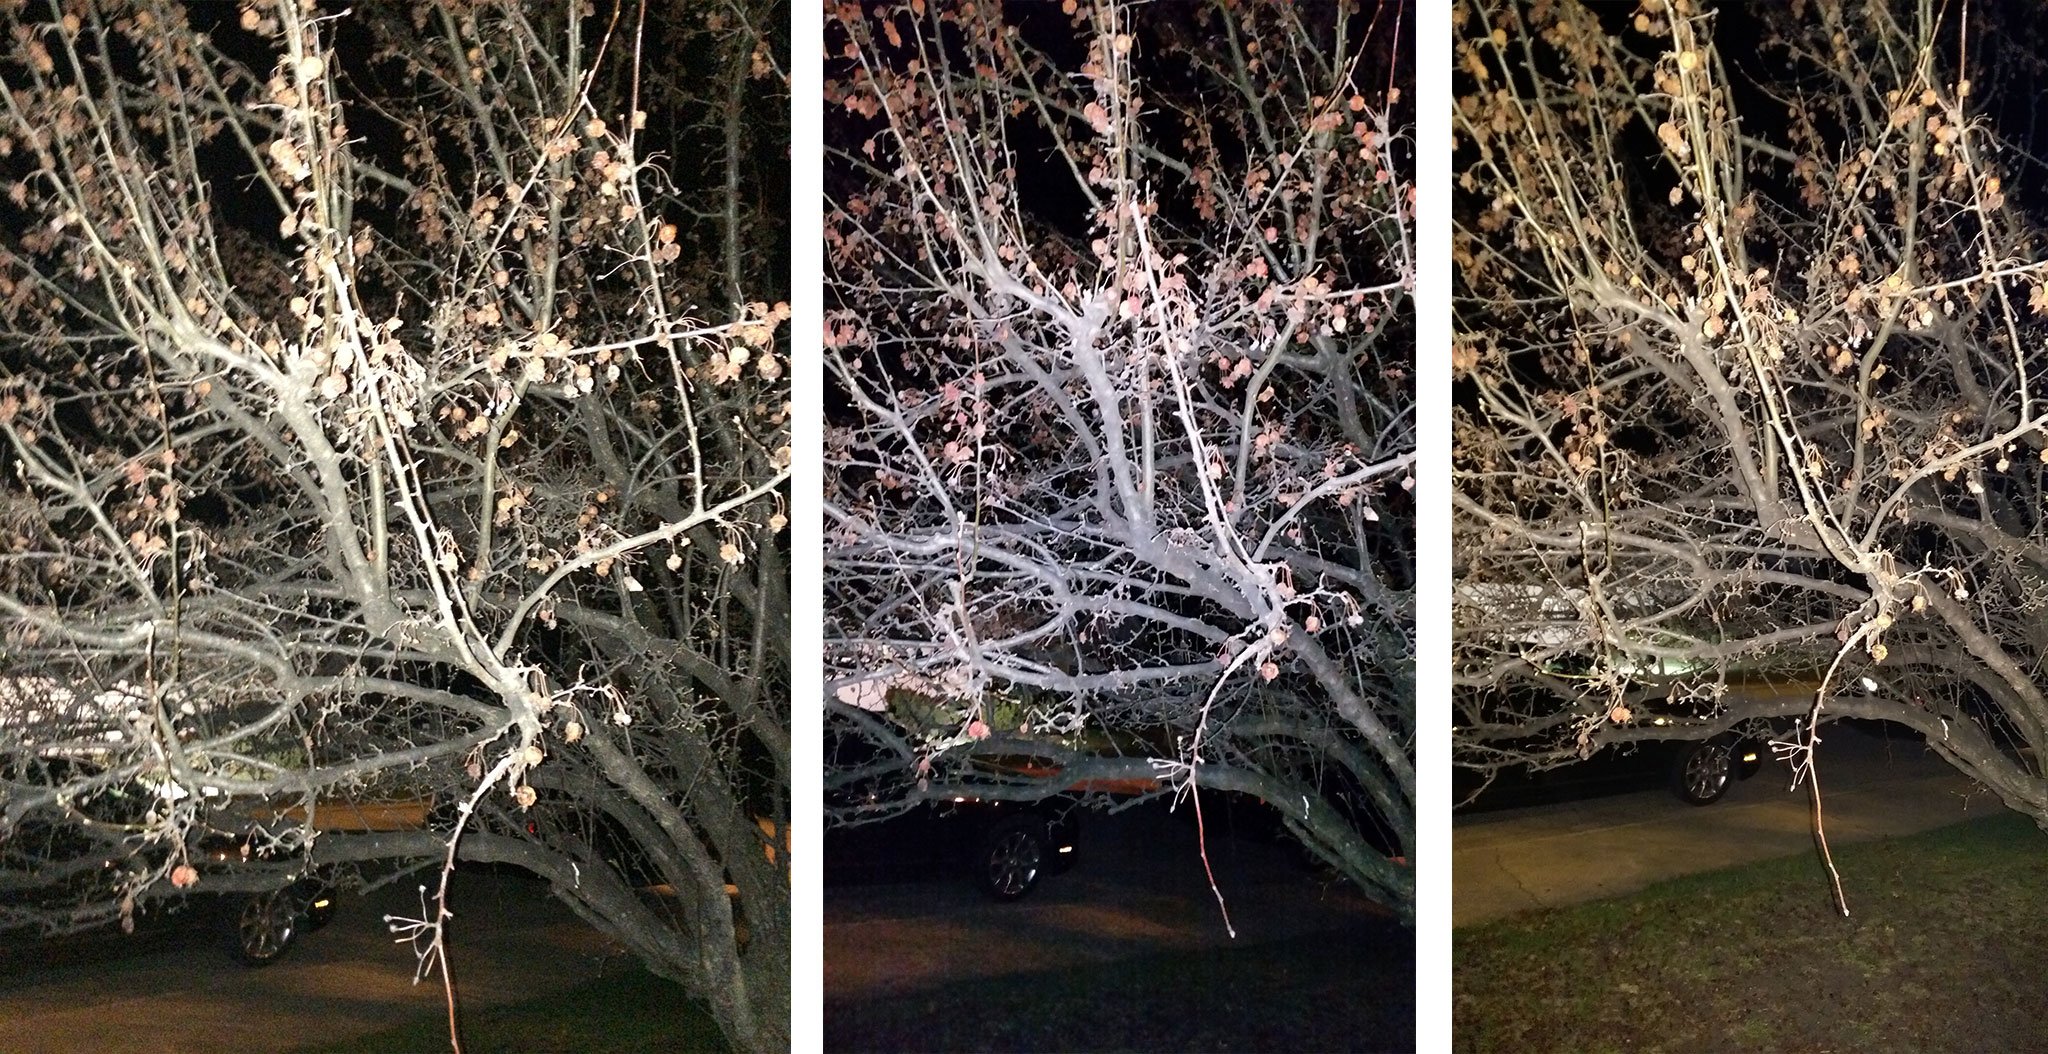 iPhone 5s vs. Galaxy S5 vs. HTC One M8: Flash photography